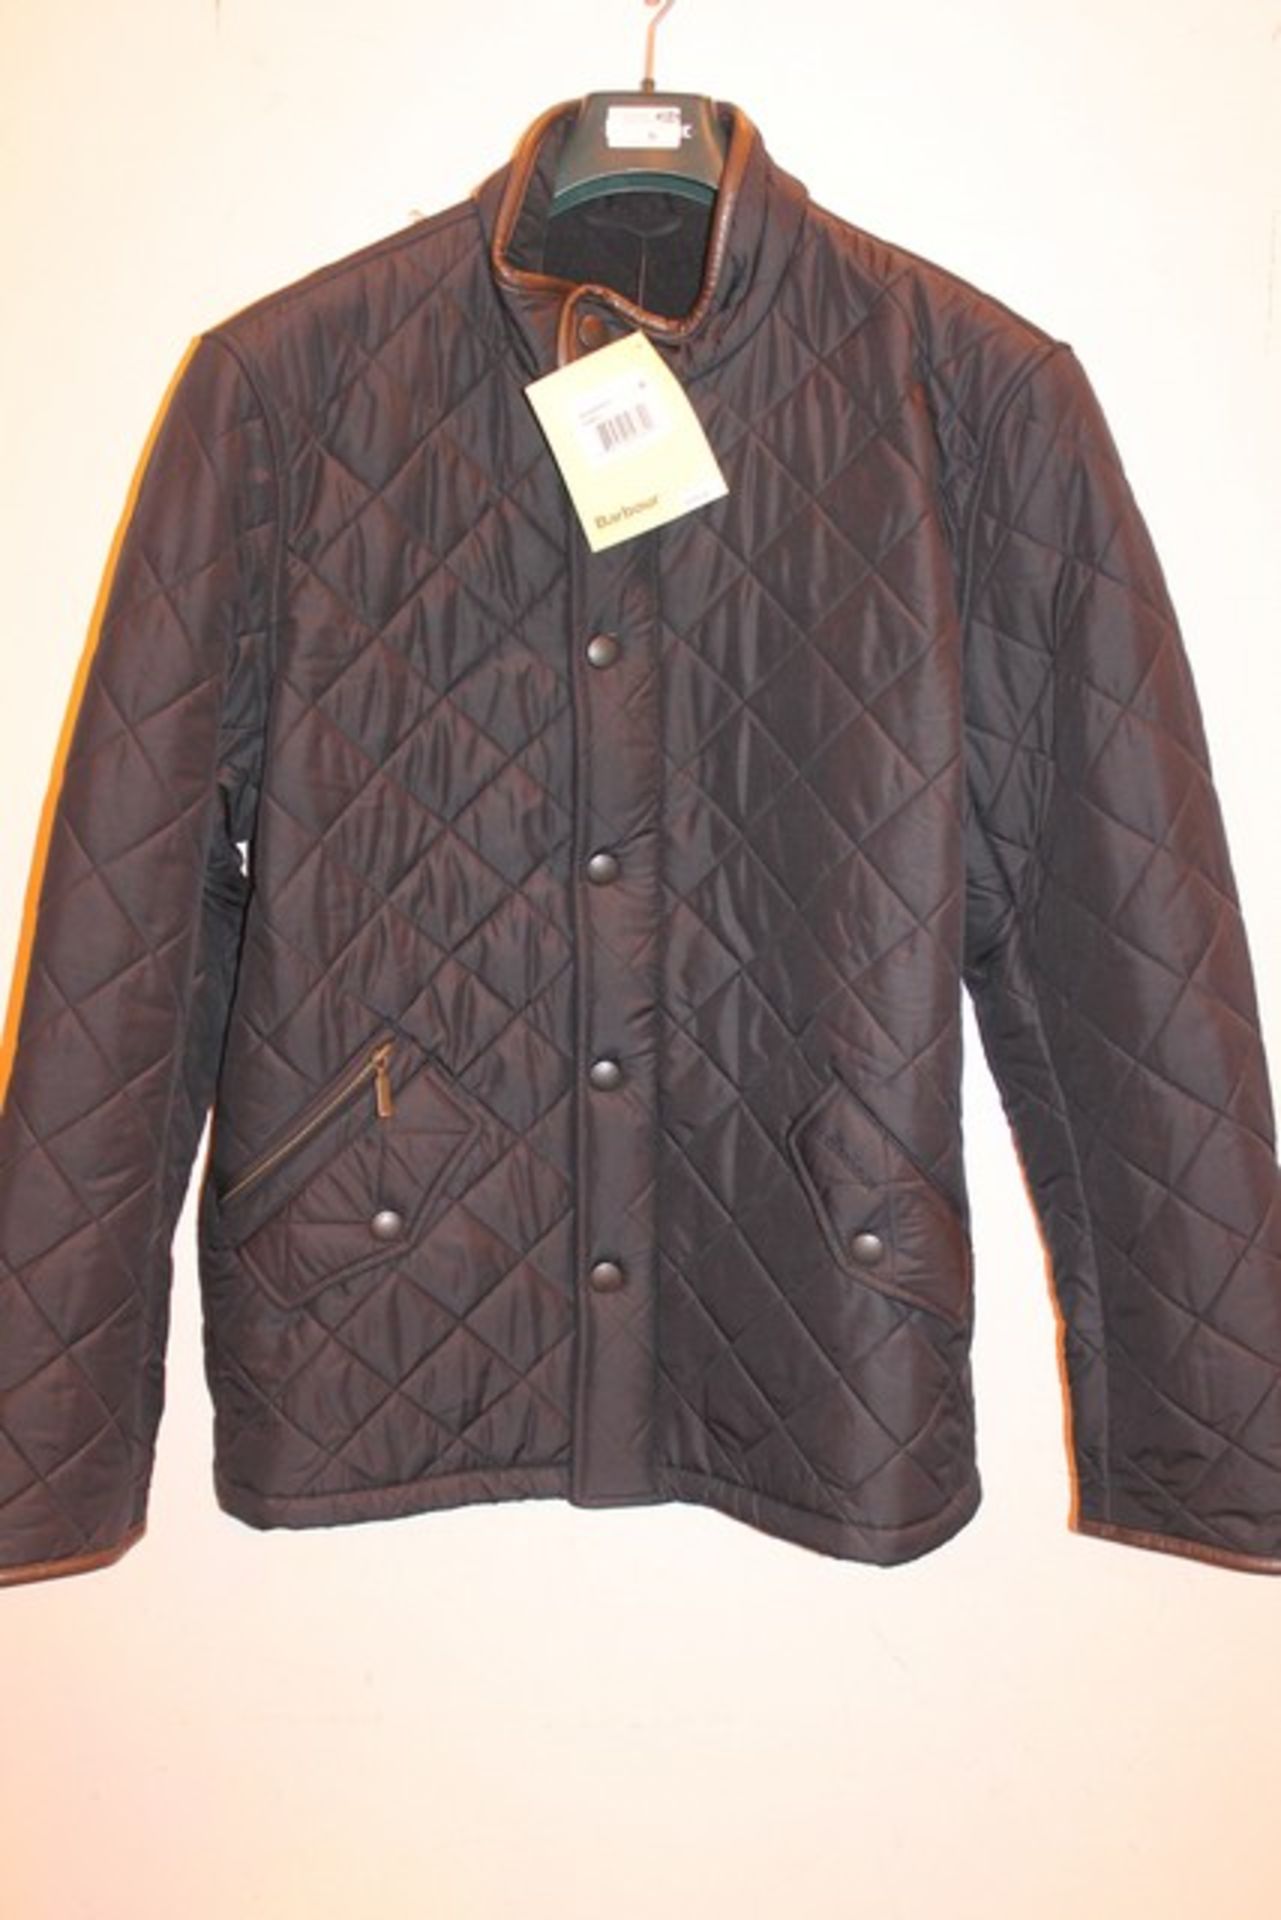 1 x BARBOUR SIZE MEDIUM POWELL QUILTED MENS JACKET RRP £150 (CAGE 12.008)   *PLEASE NOTE THAT THE